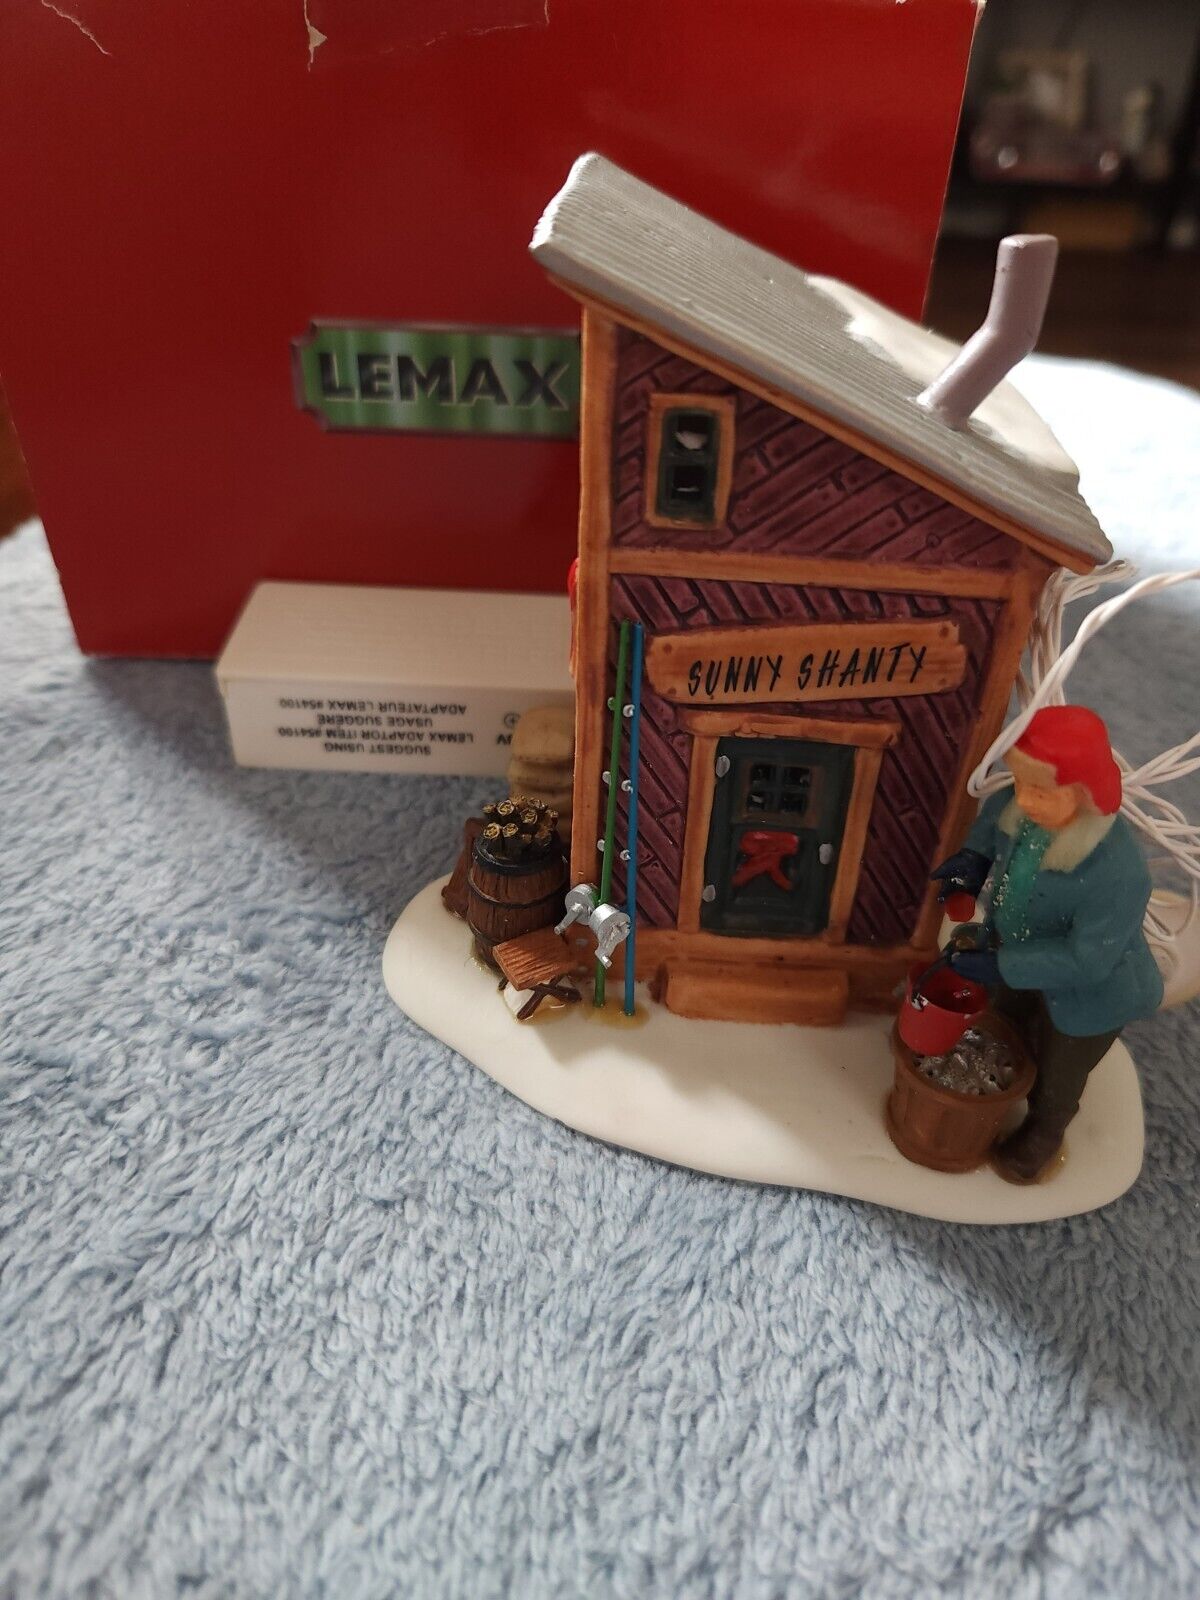 Lemax Christmas Village Collection Lighted Sunny Shanty - w box